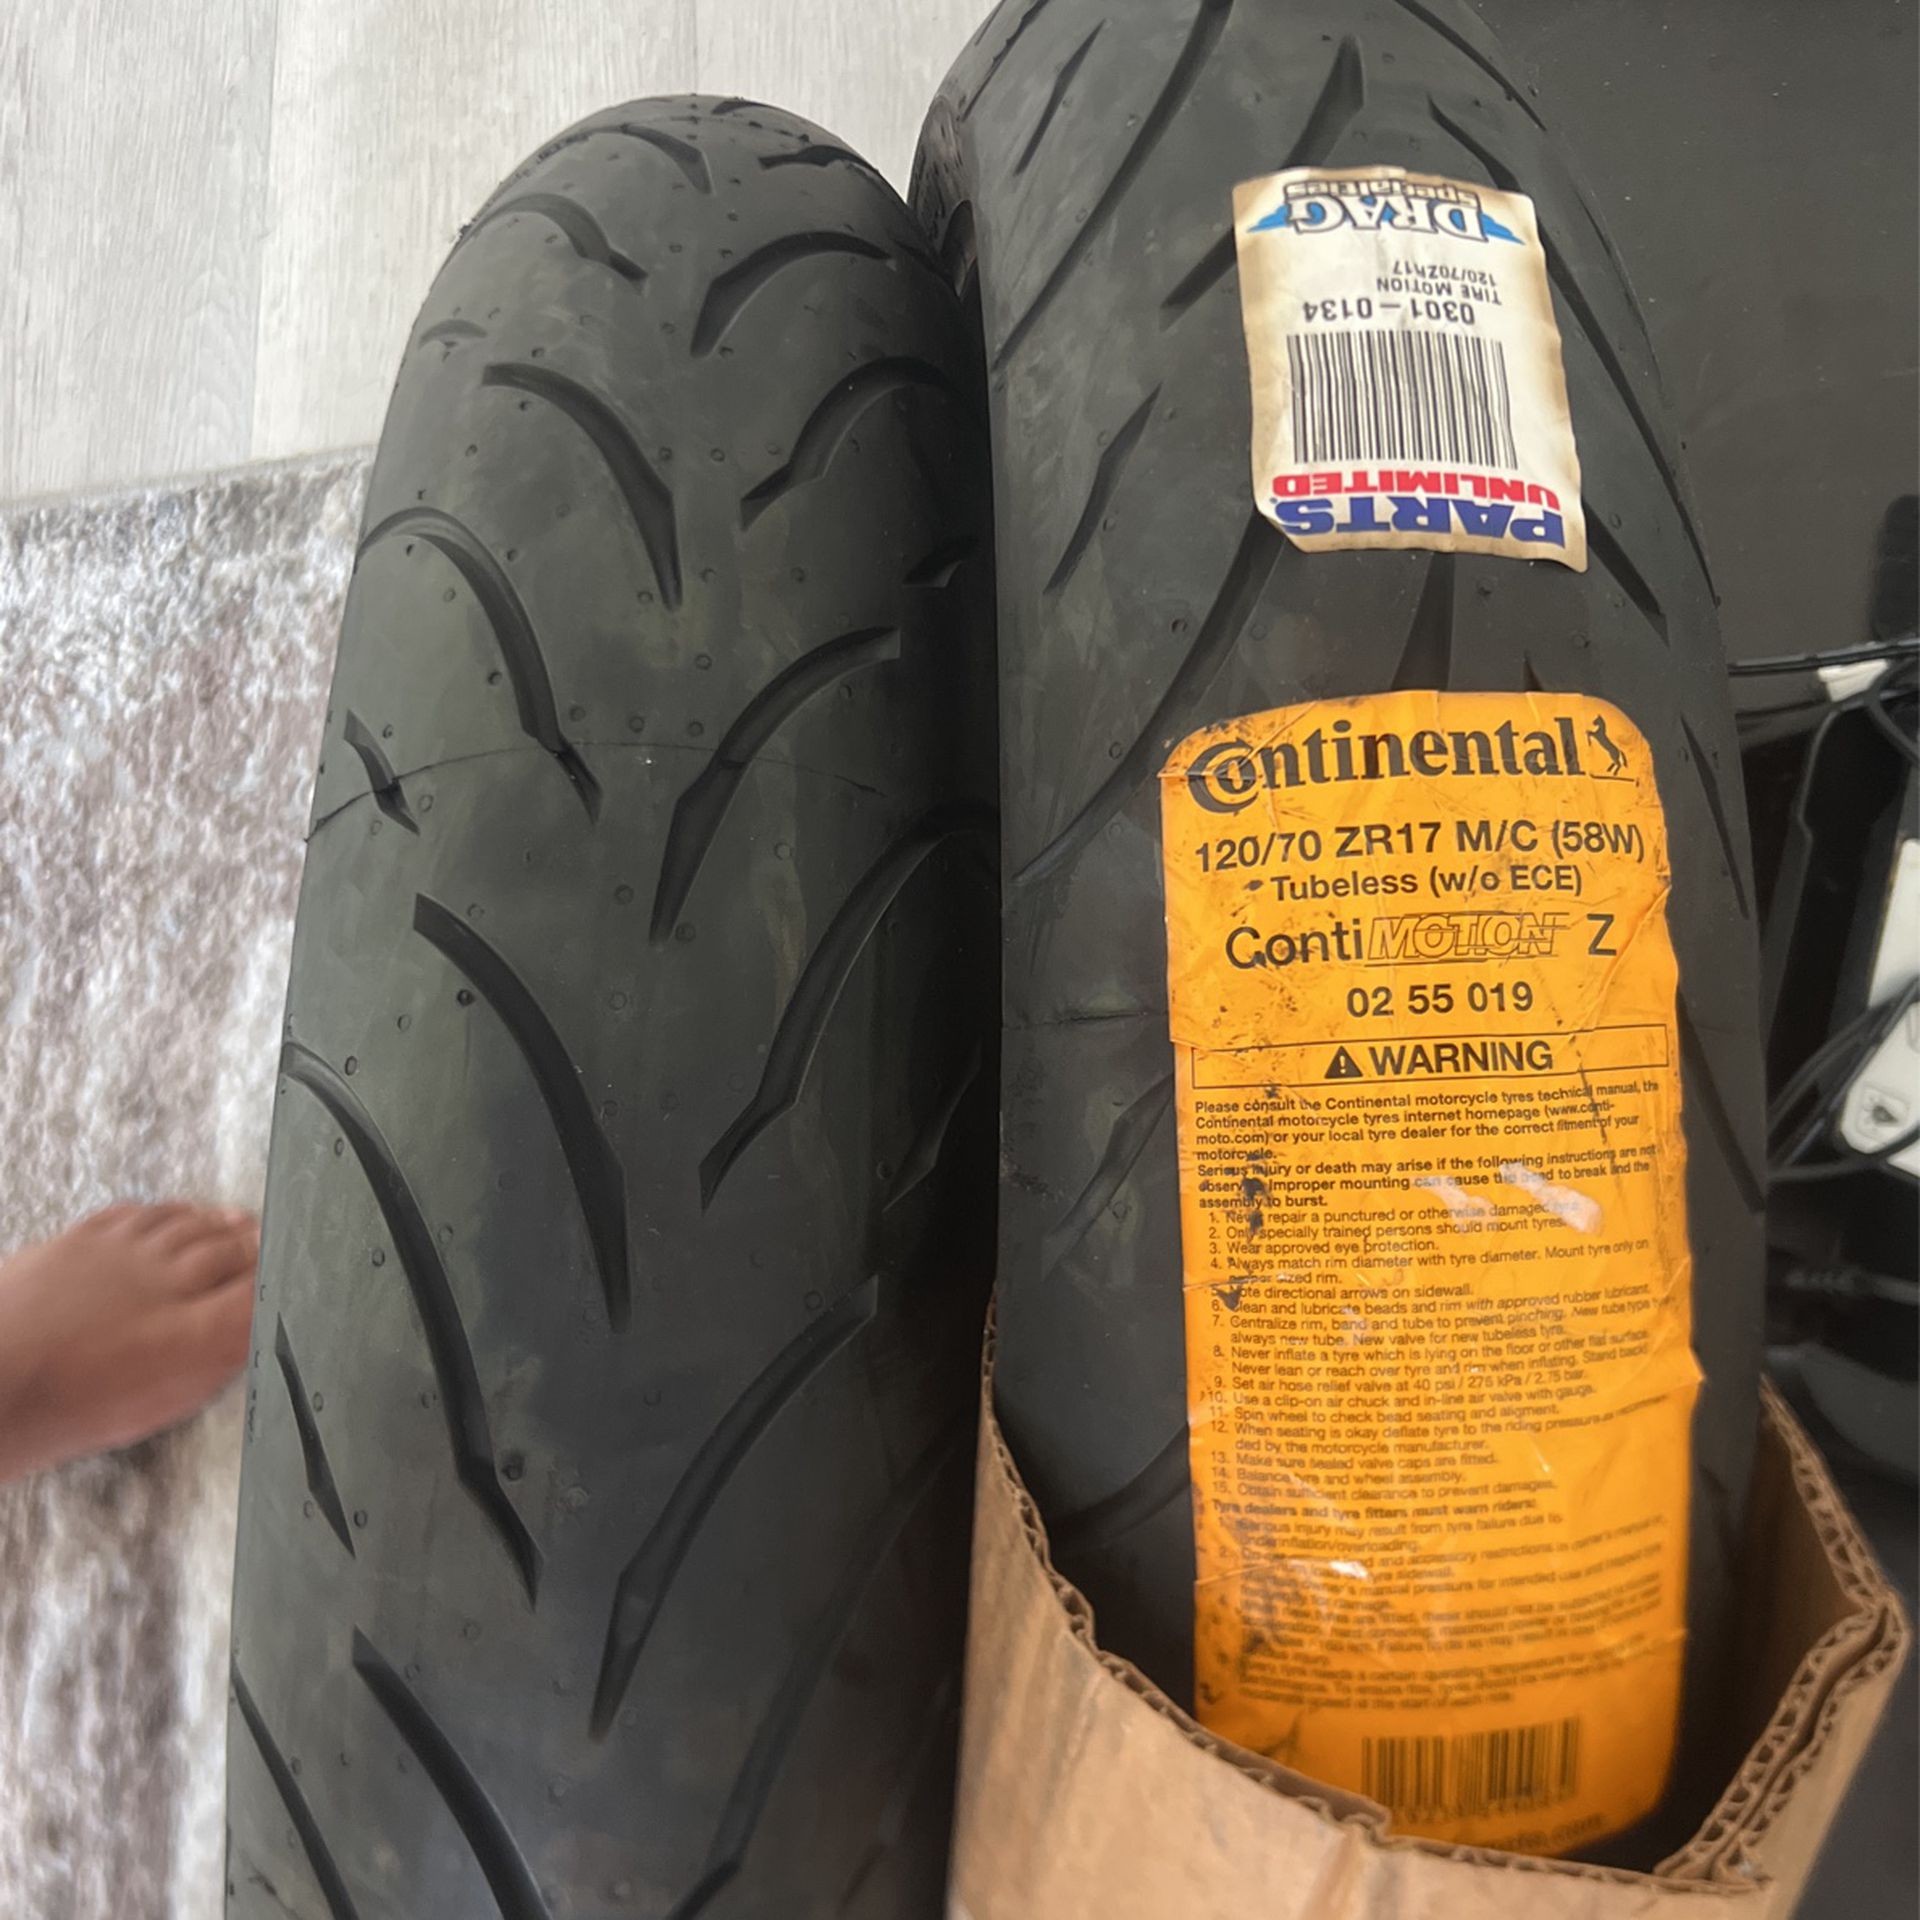 R1 Front Tires